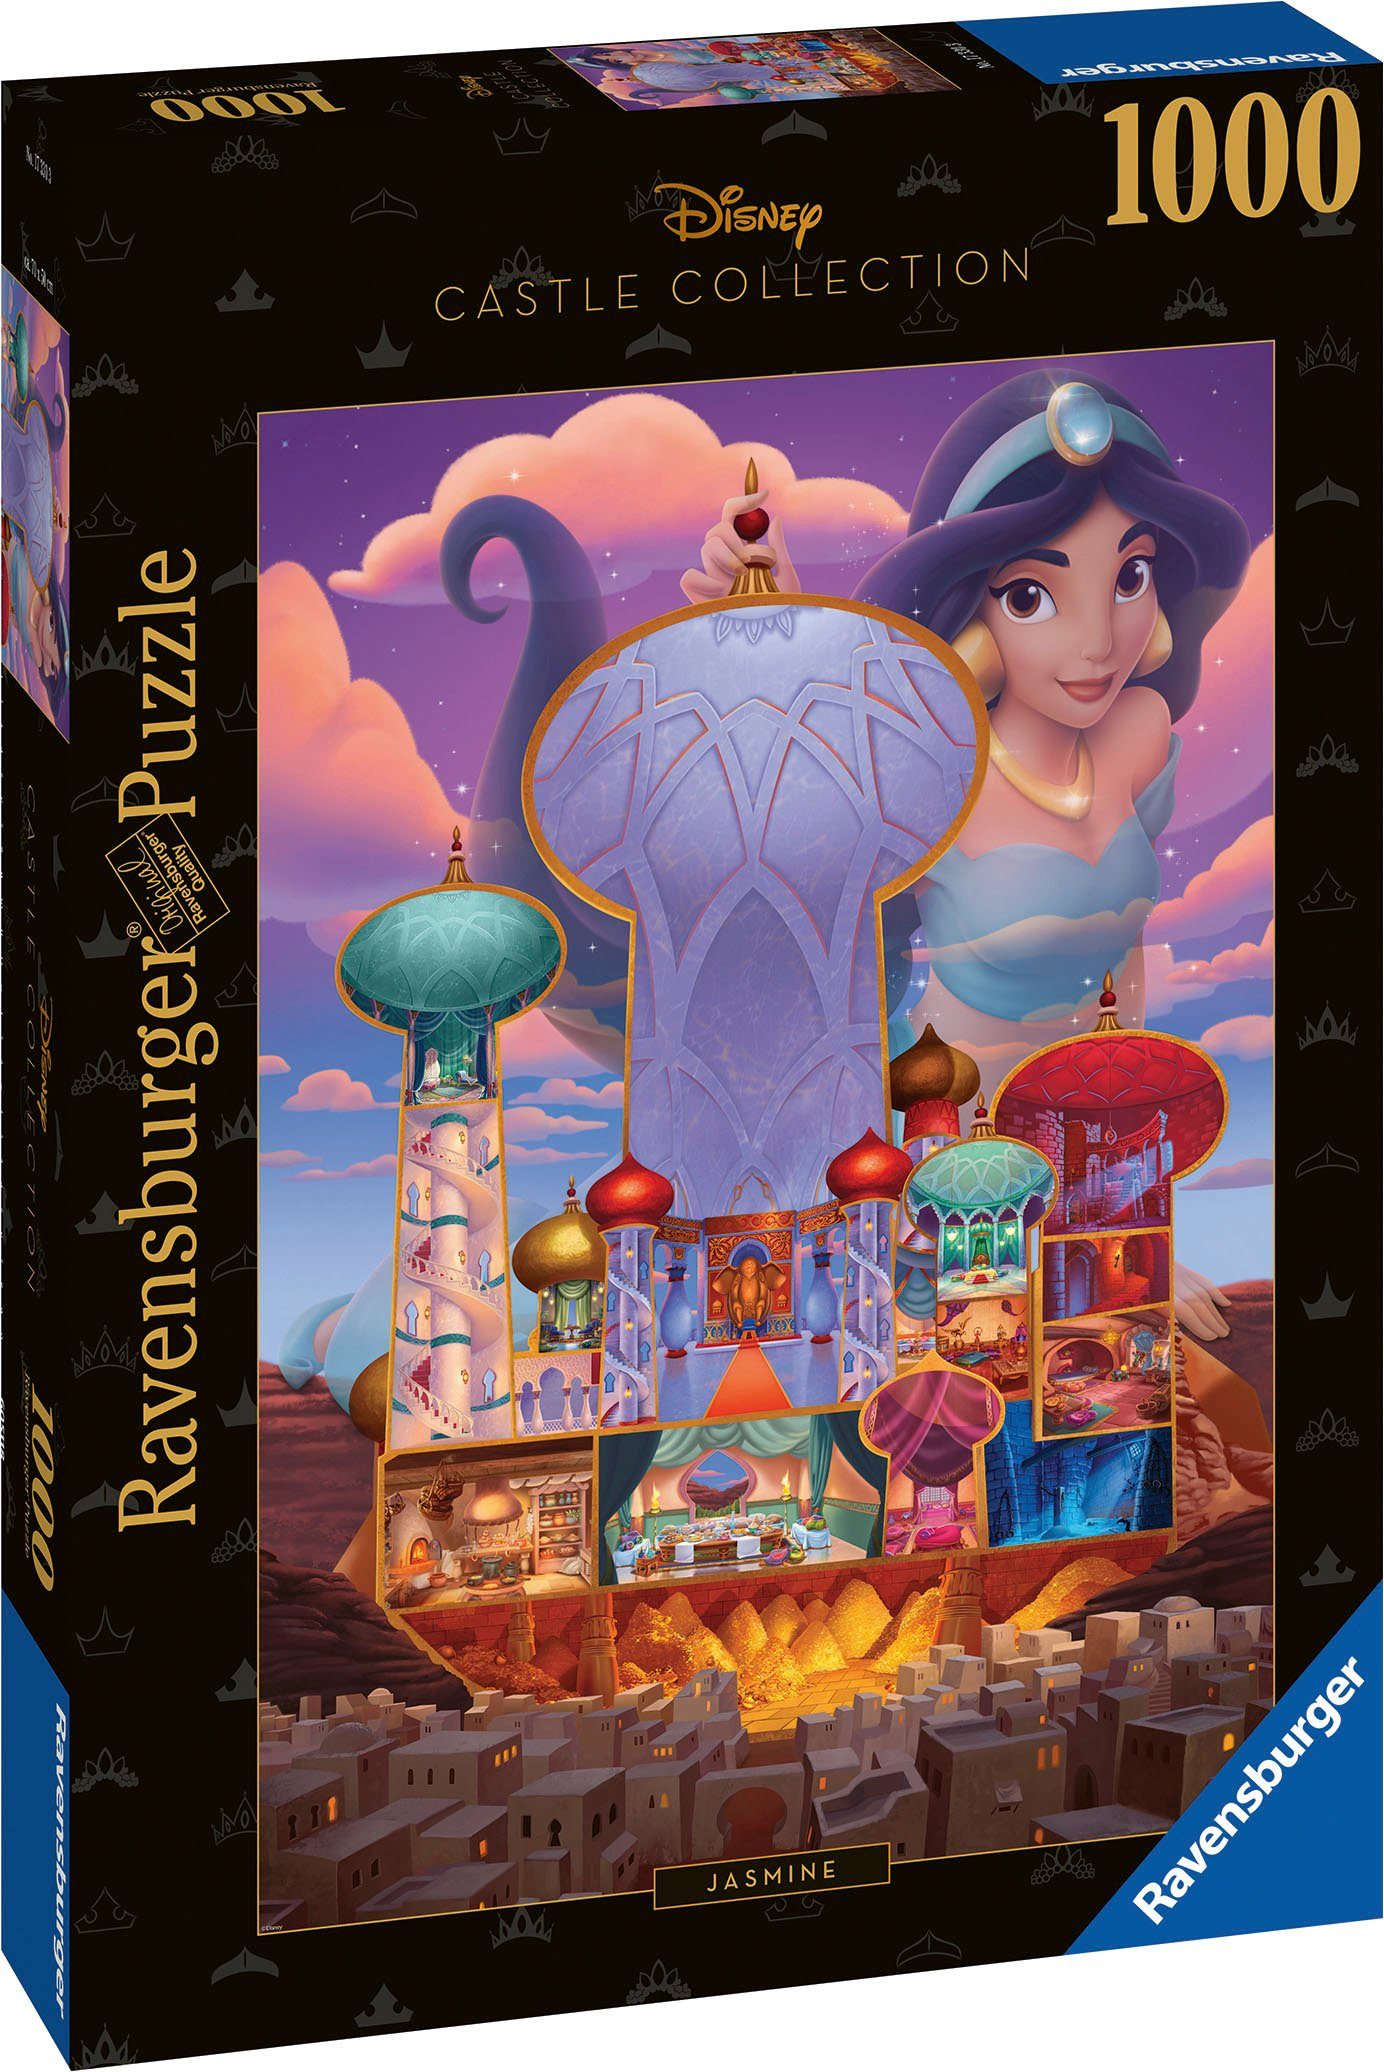 Ravensburger Puzzle Made Germany Disney Puzzleteile, Jasmin, Castle in Collection, 1000